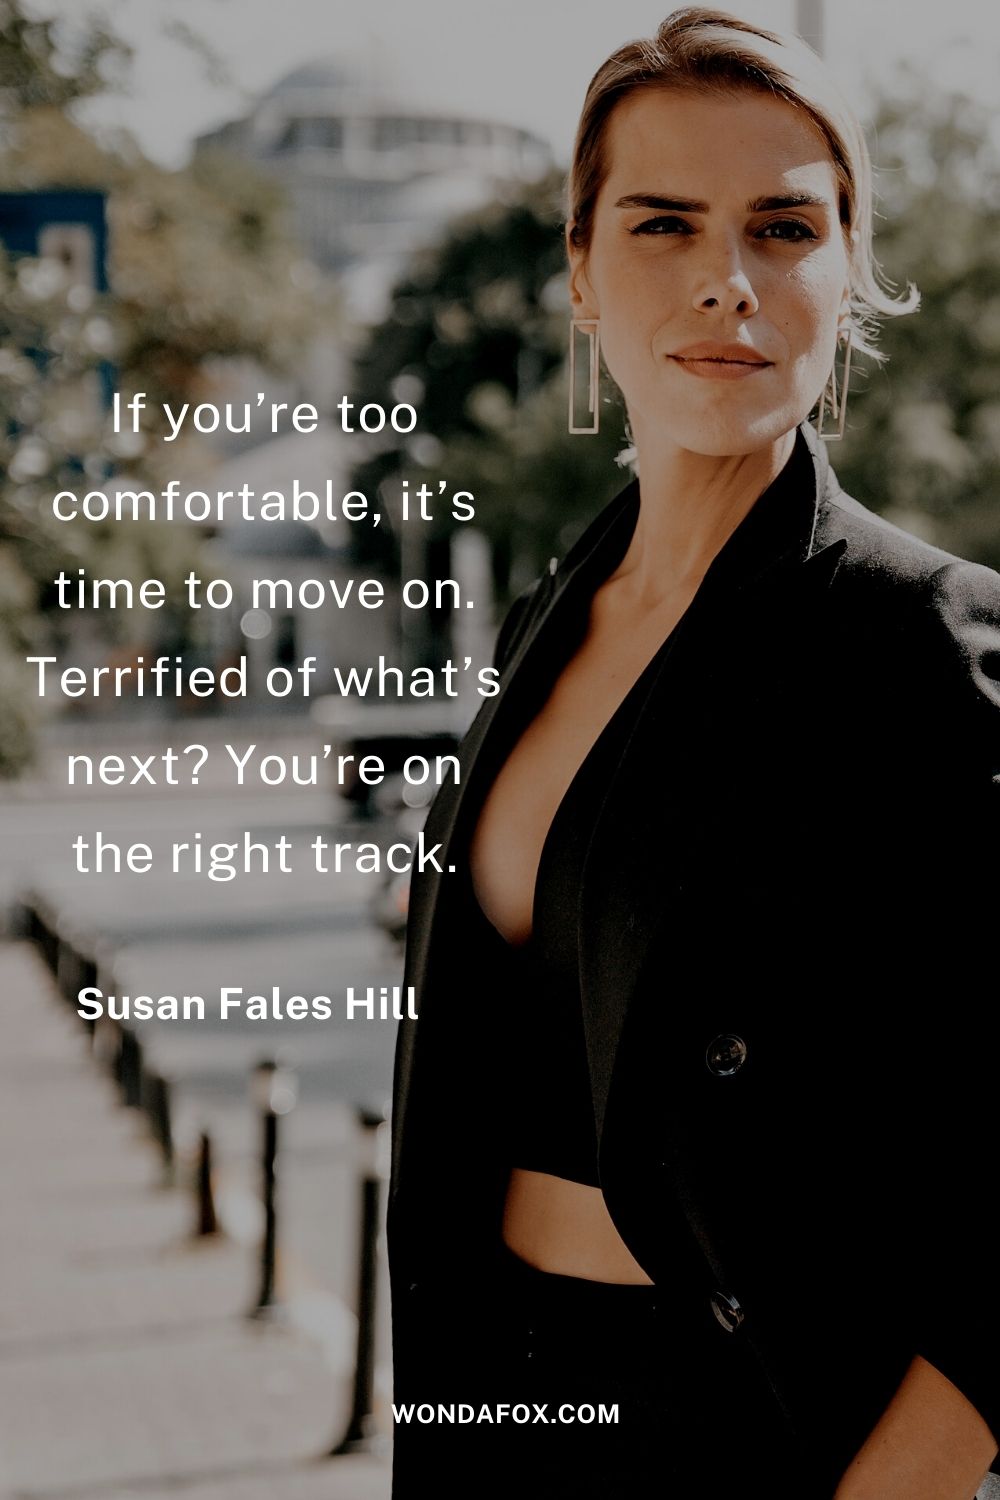 If you’re too comfortable, it’s time to move on. Terrified of what’s next? You’re on the right track.